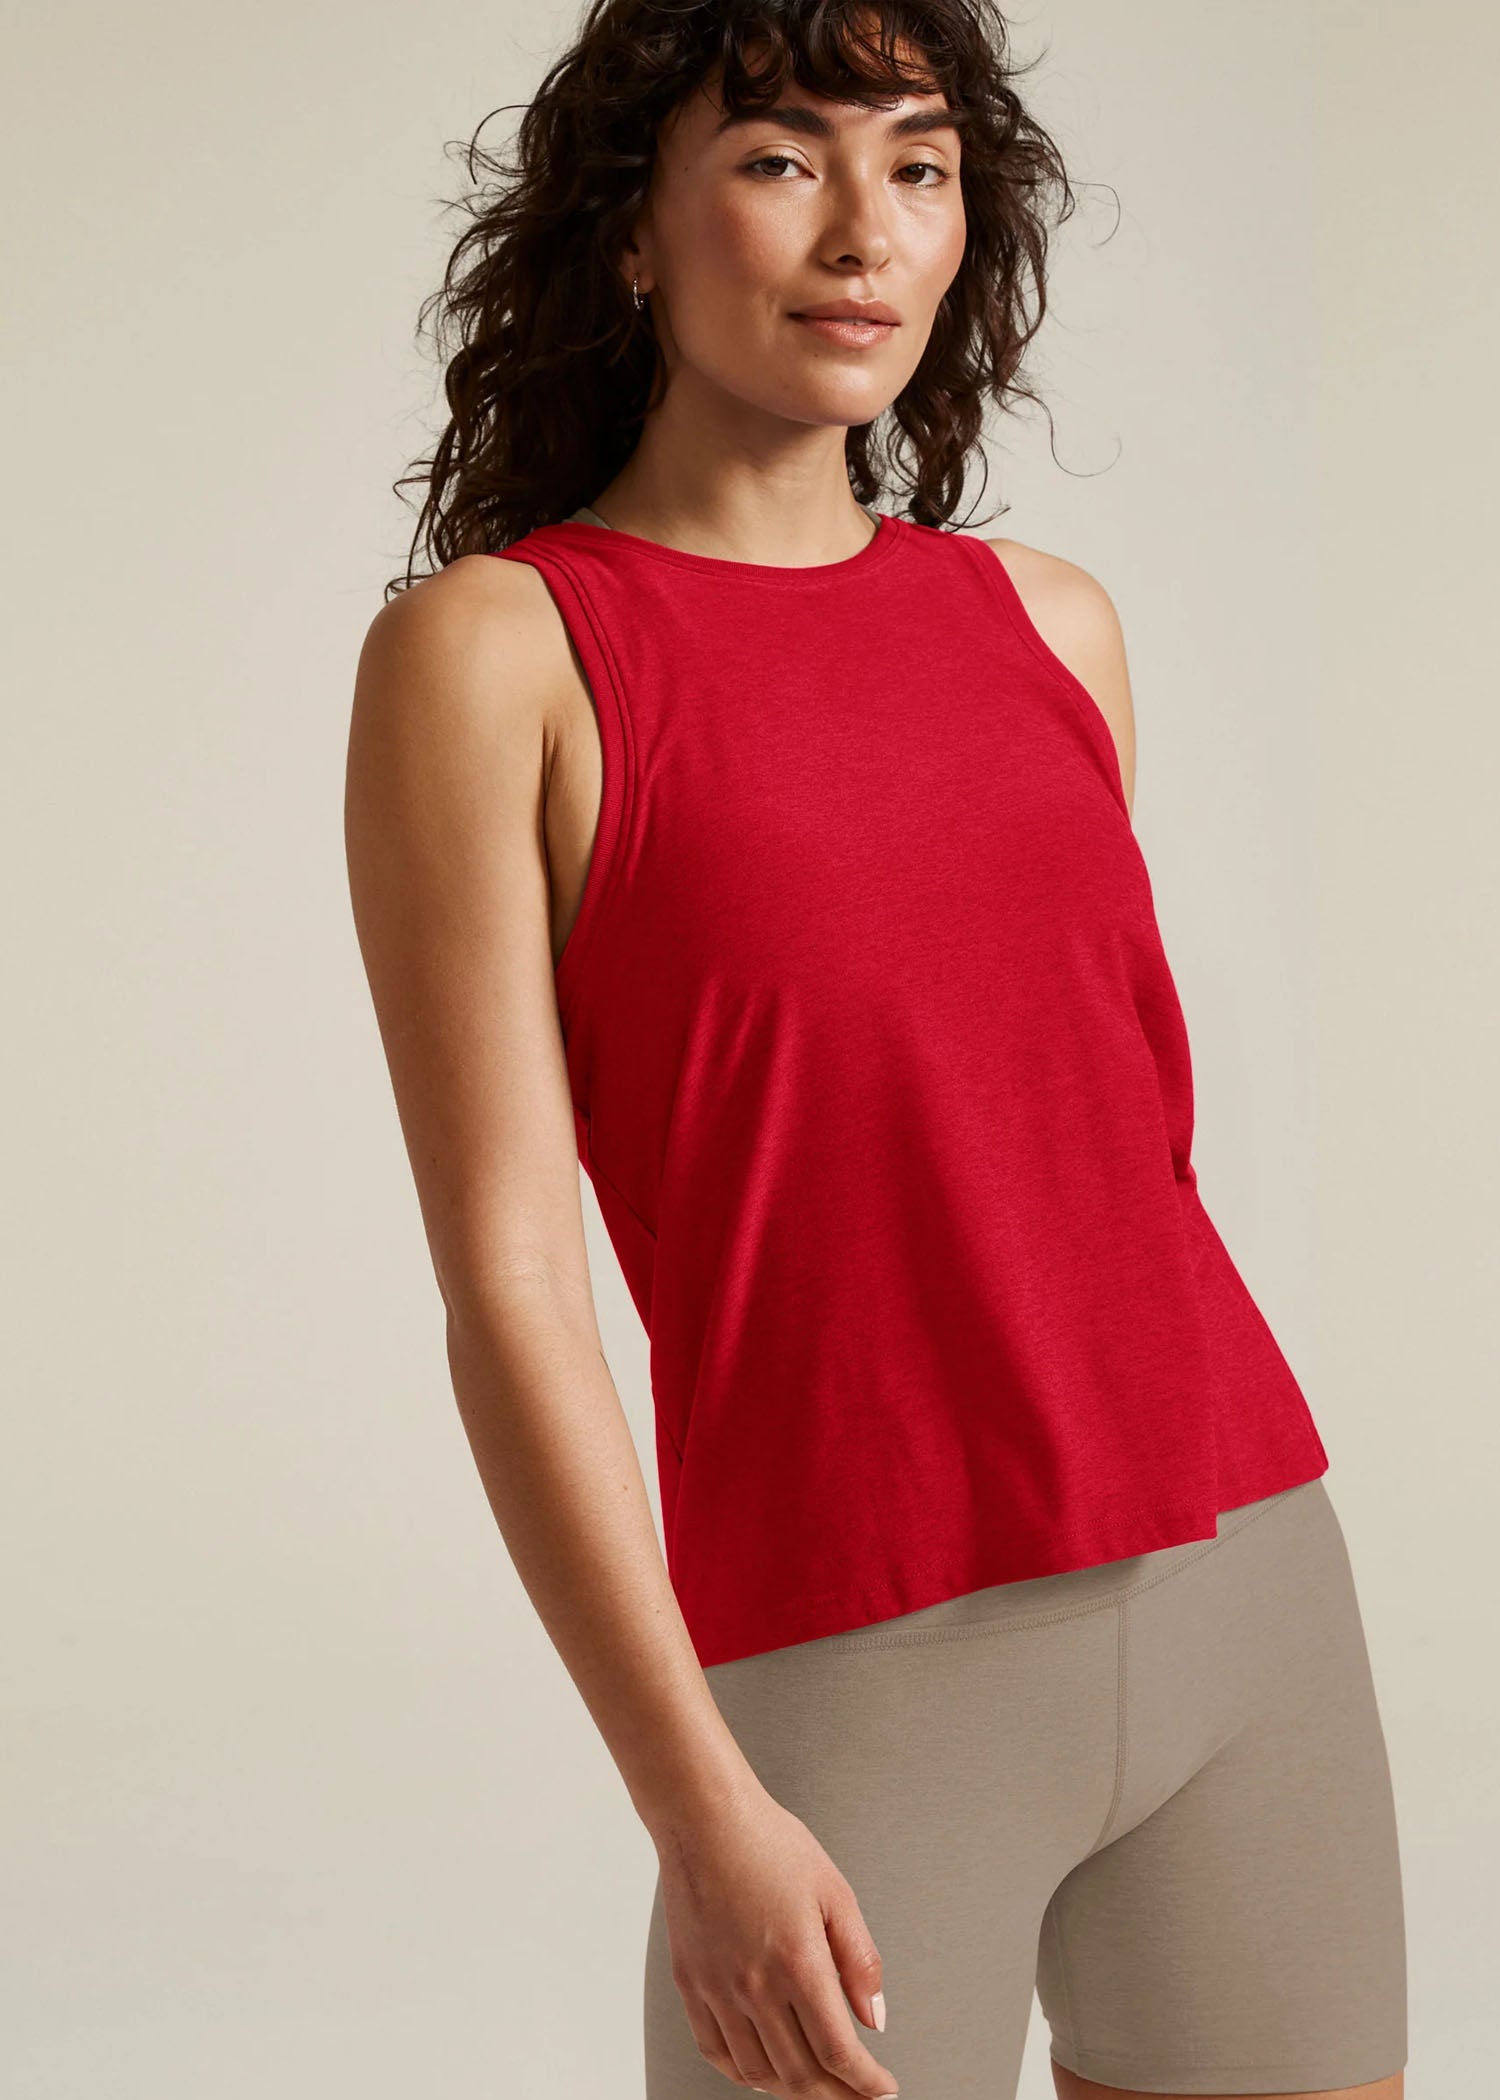 Featherweight Rebalance Tank- Candy Apple Red